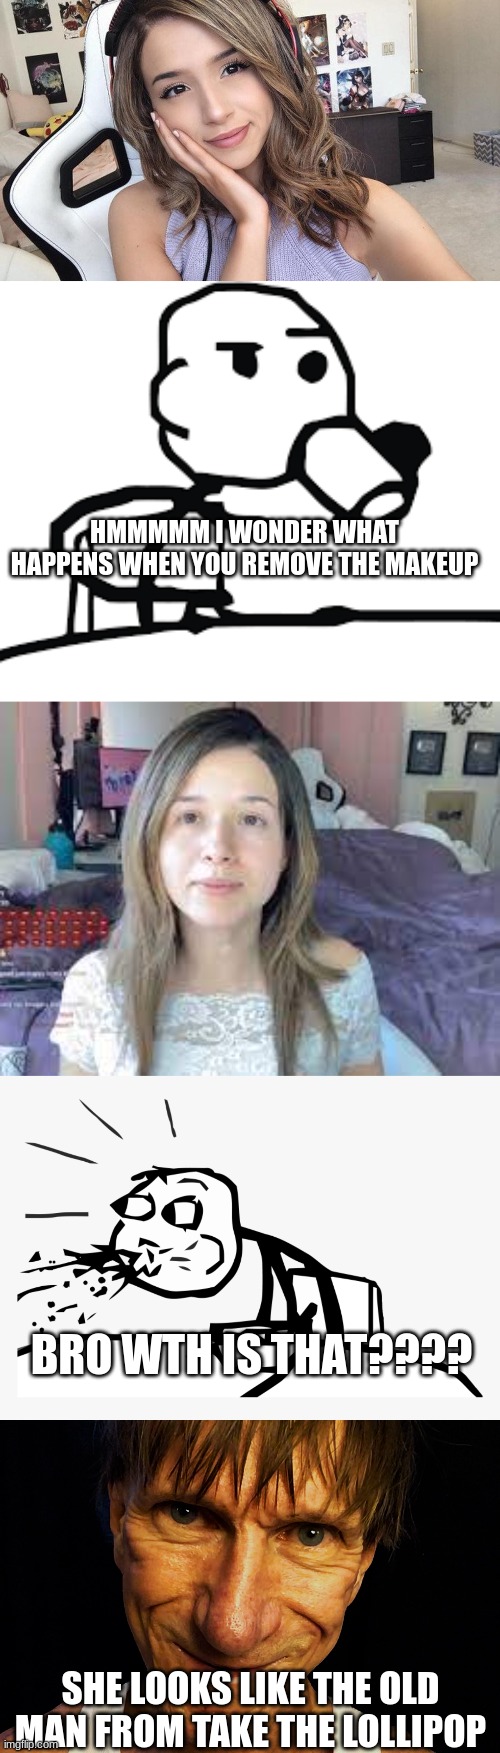 Pokimid |  HMMMMM I WONDER WHAT HAPPENS WHEN YOU REMOVE THE MAKEUP; BRO WTH IS THAT???? SHE LOOKS LIKE THE OLD MAN FROM TAKE THE LOLLIPOP | image tagged in memes,fun,youtube | made w/ Imgflip meme maker